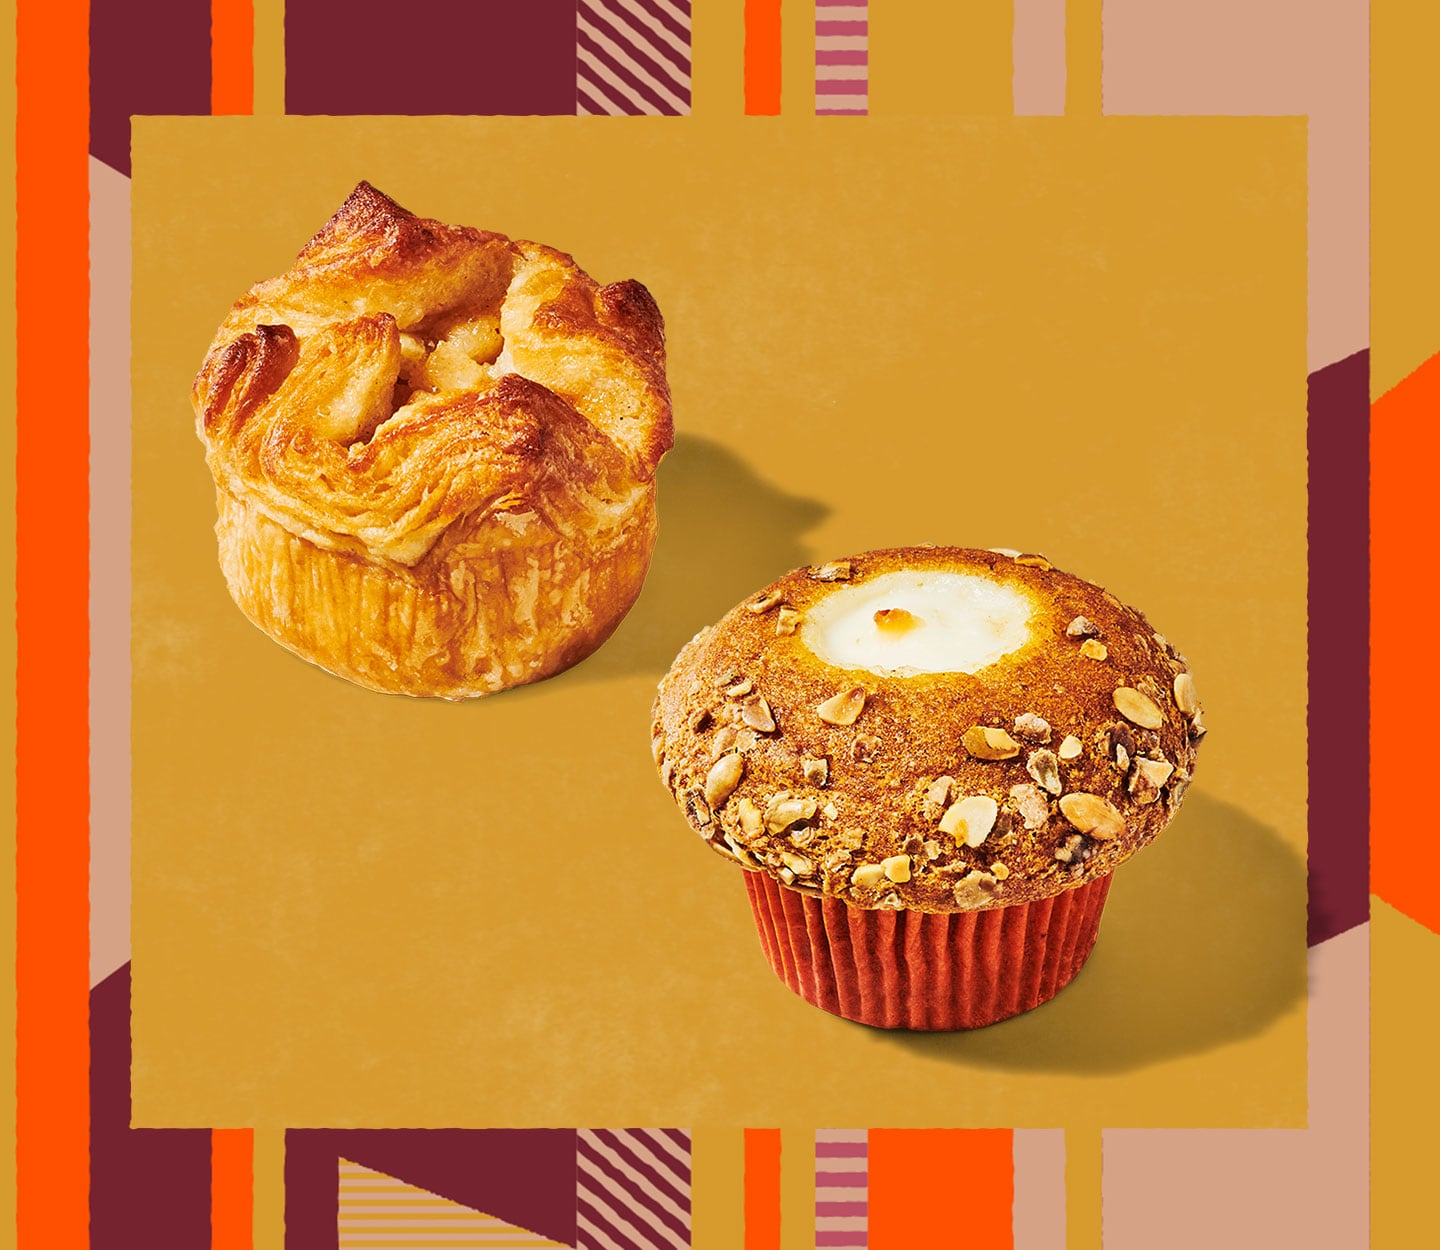 A side shot of a rounded croissant with a wavy top next to a nut-topped muffin with cream cheese showing through.